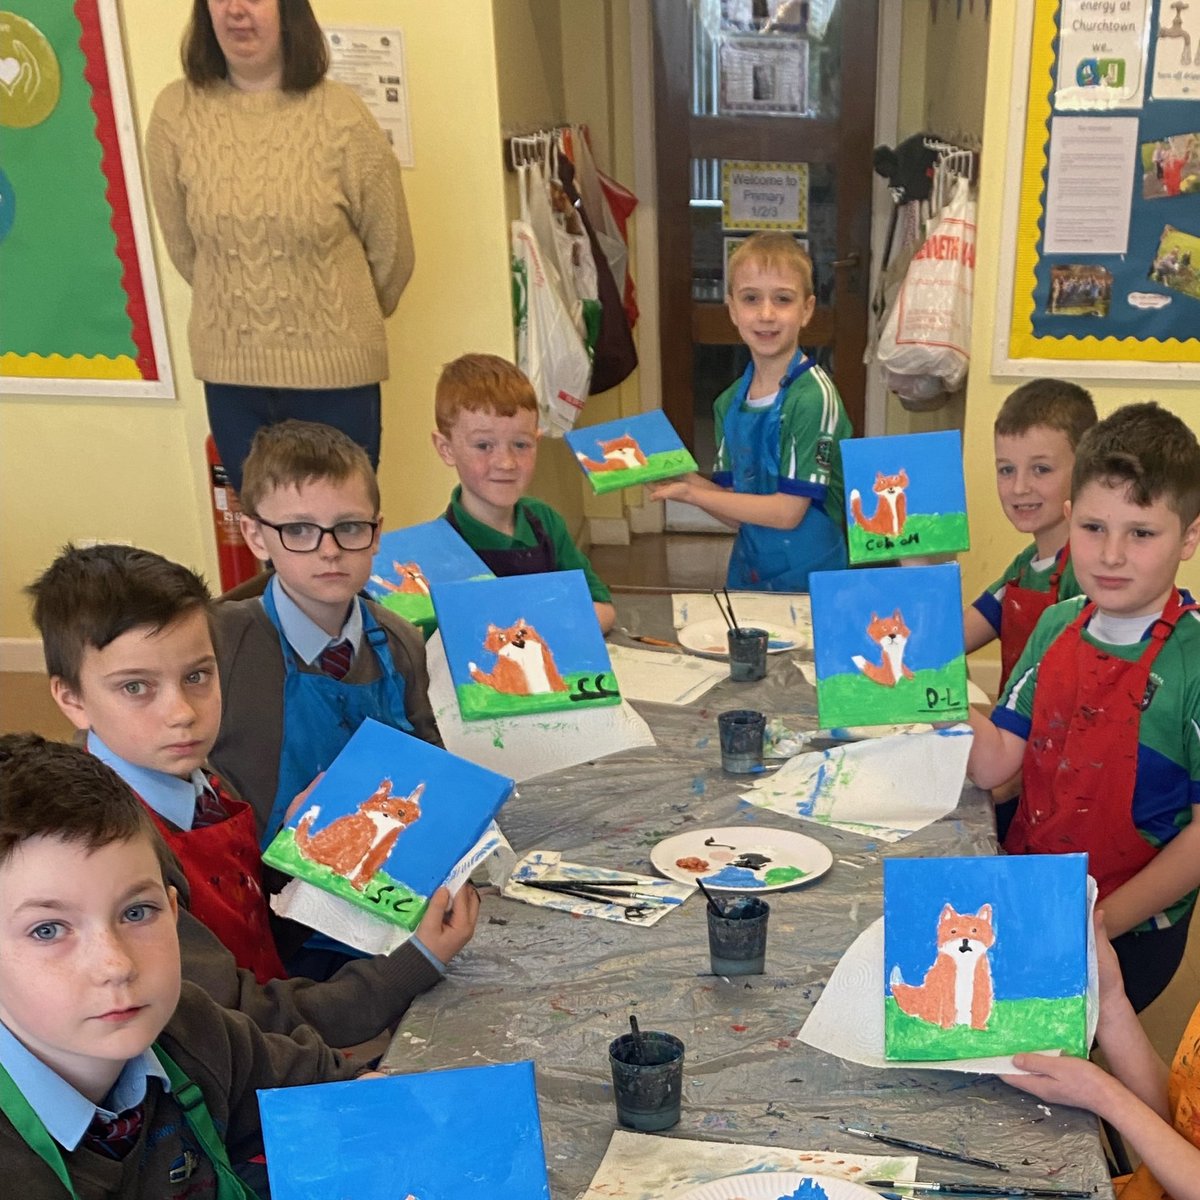 I had a great morning with the P4/5 pupils from St Columb’s PS and Churchtown PS learning all about Fantastic Mr Fox. @CASEshared @Leargas @SEUPB #knowyourstory #shareyourstory